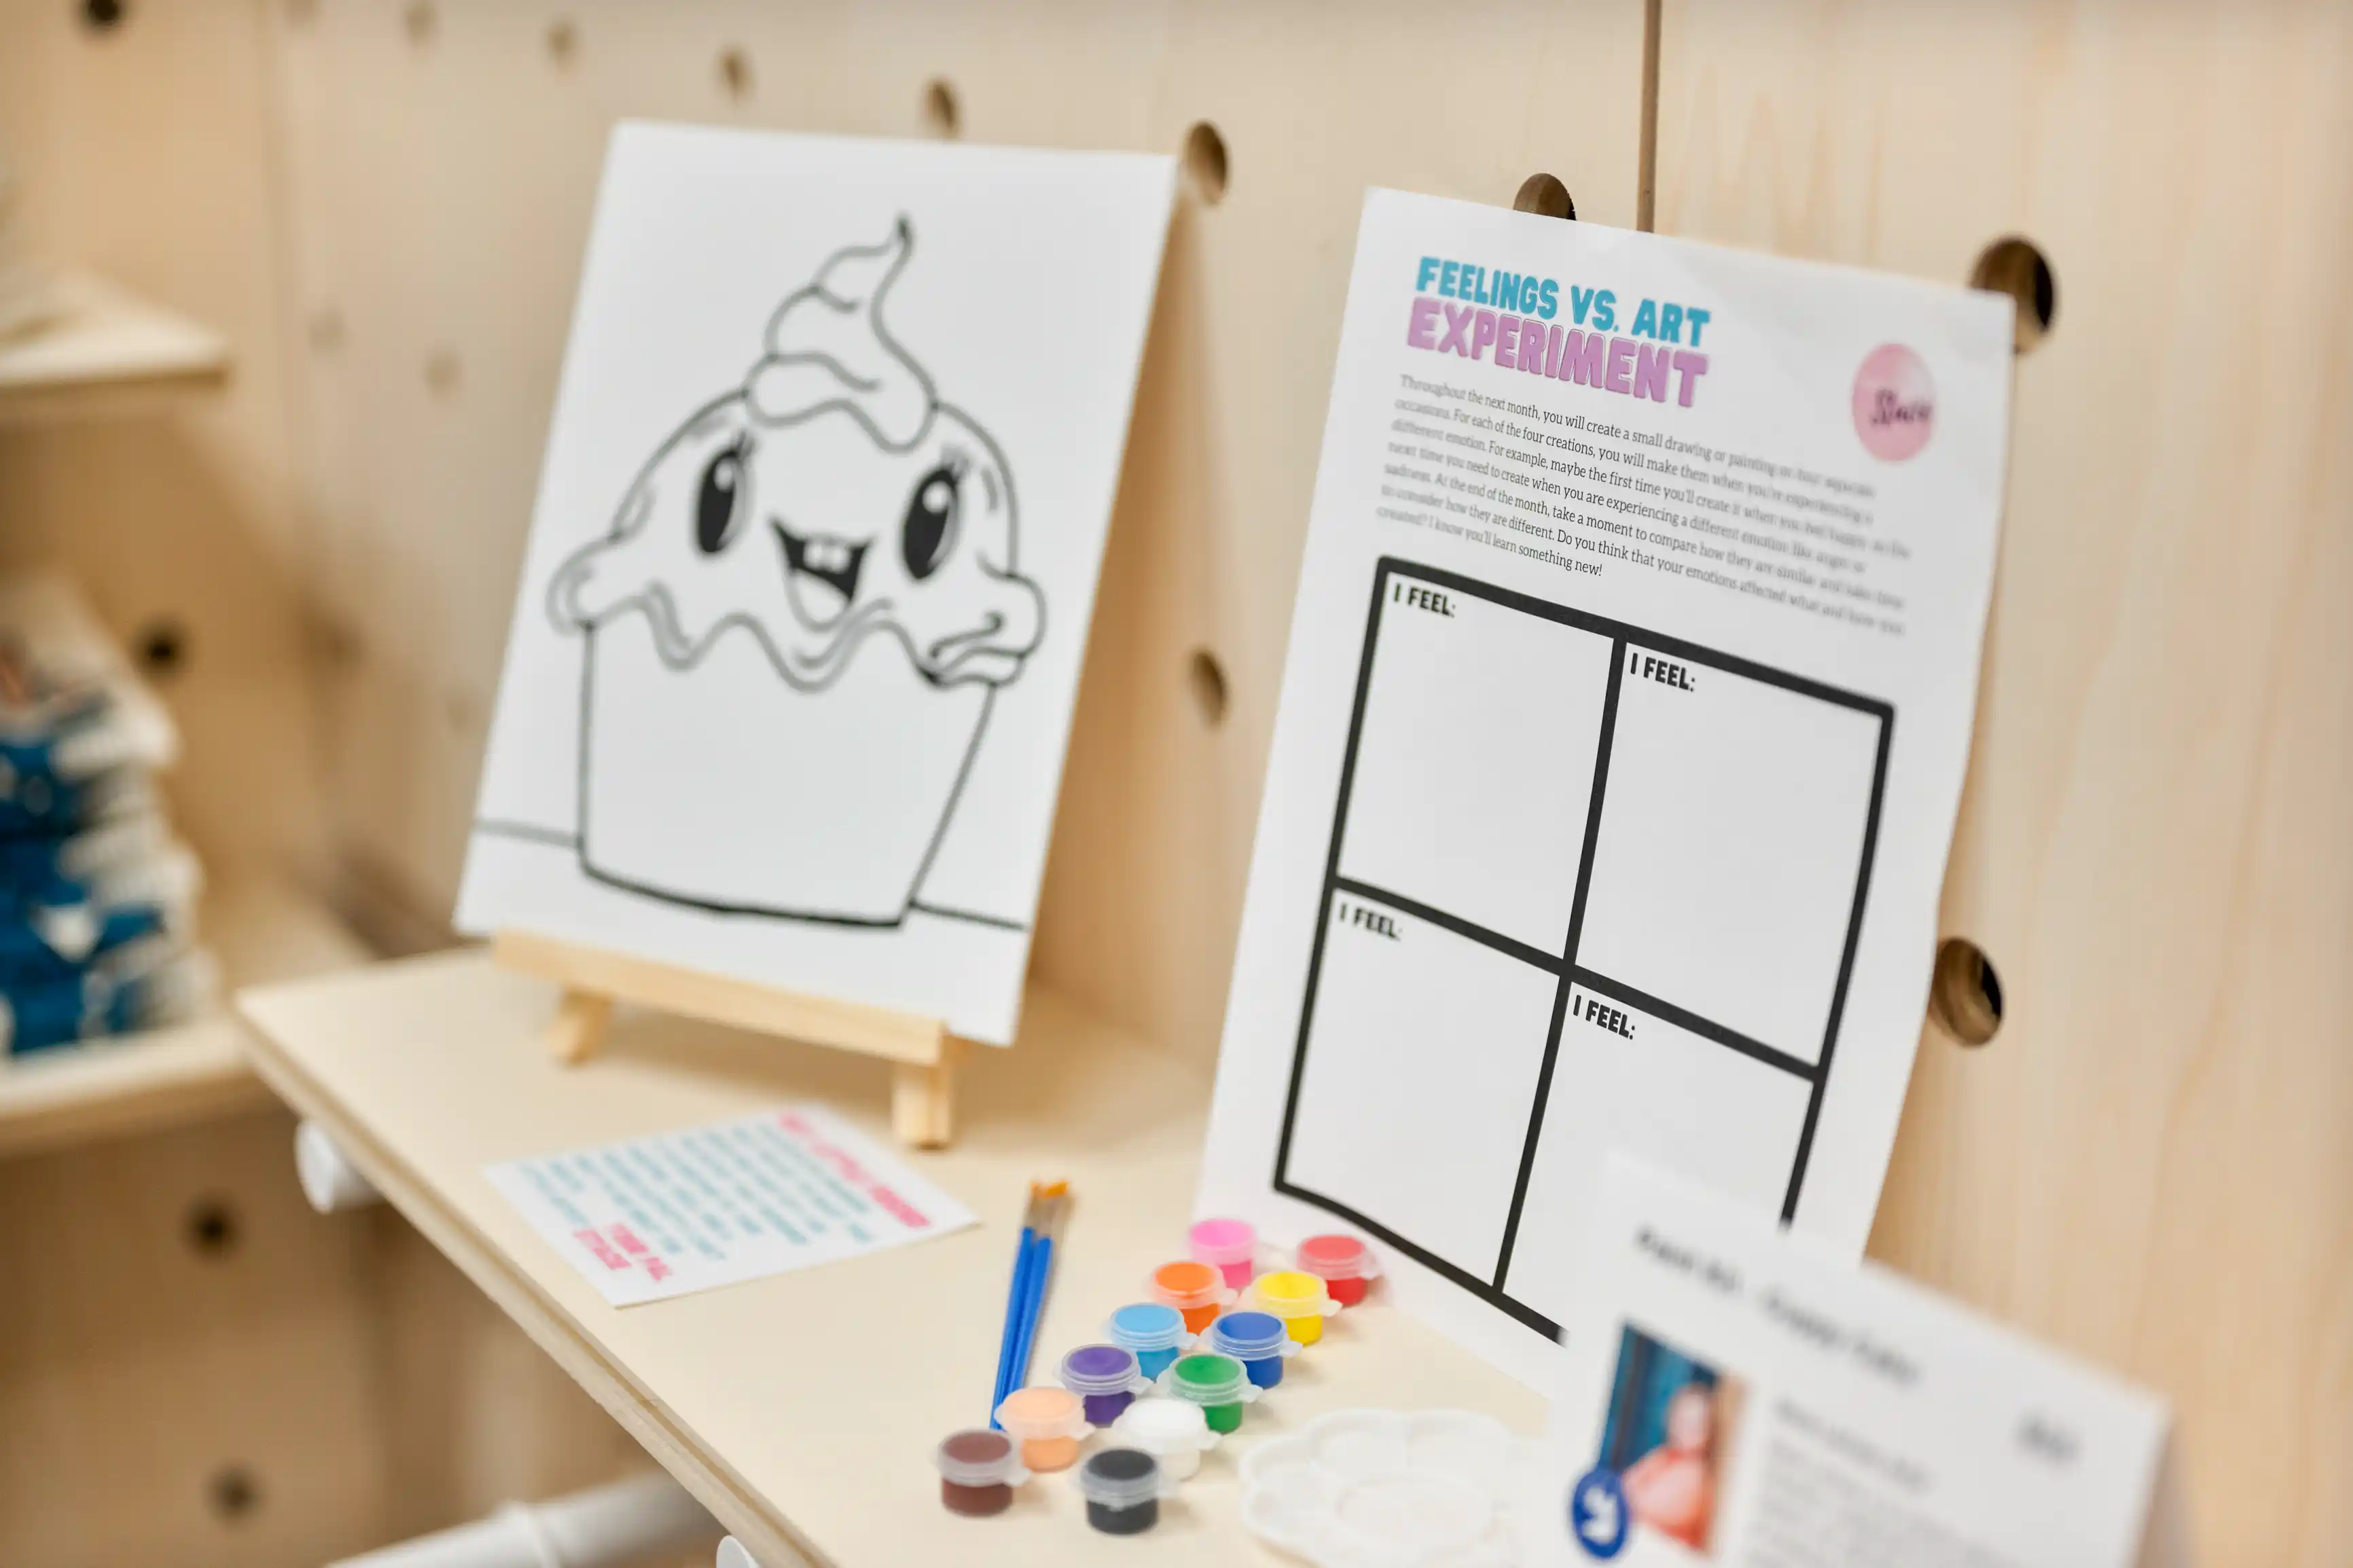 Art therapy station setup with a cartoon cupcake drawing on an easel, paint supplies, and an art therapy 'Feelings vs. Art' experiment worksheet.